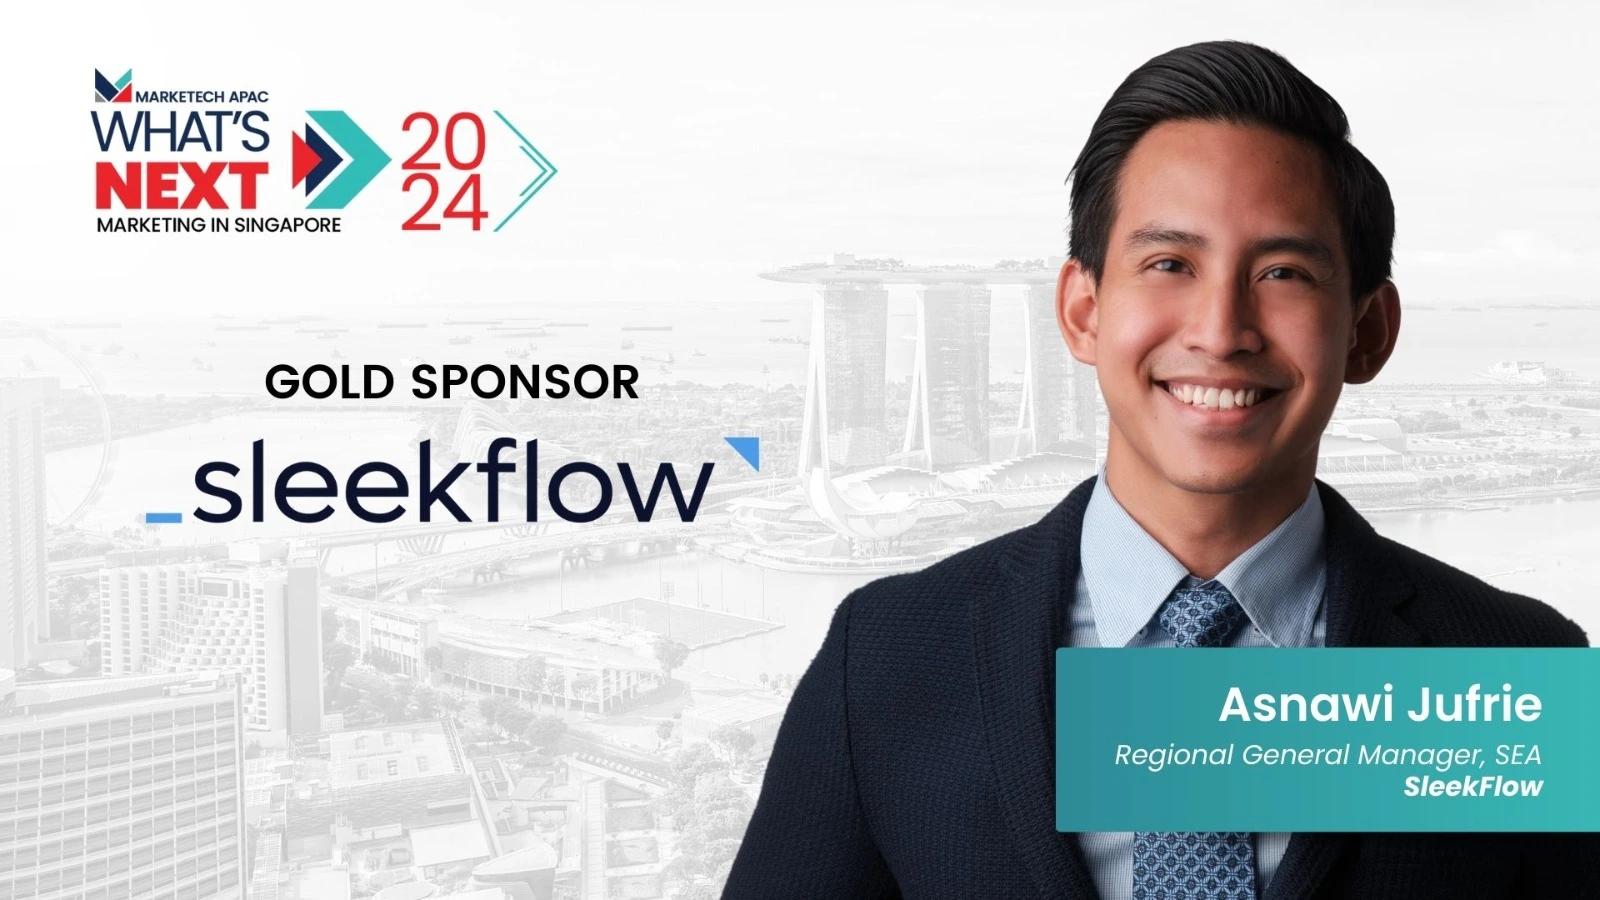 SleekFlow leads the discussion on enhancing omnichannel CX as Gold Sponsor at “What’s NEXT 2024: Marketing in Singapore”